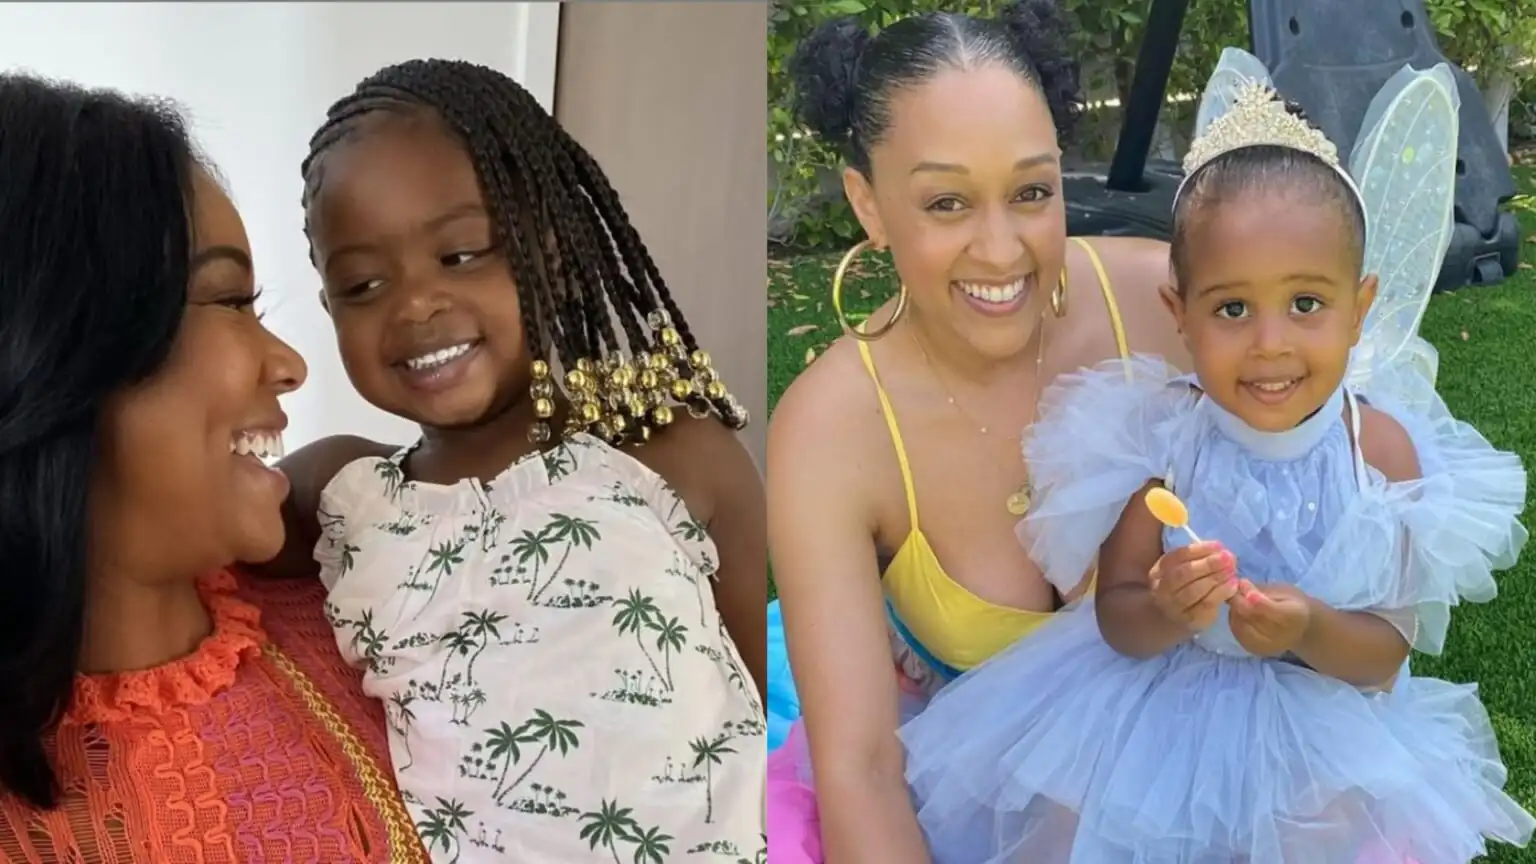 Black Trillions Tia Mowry says Kaavia James helped her daughter learn